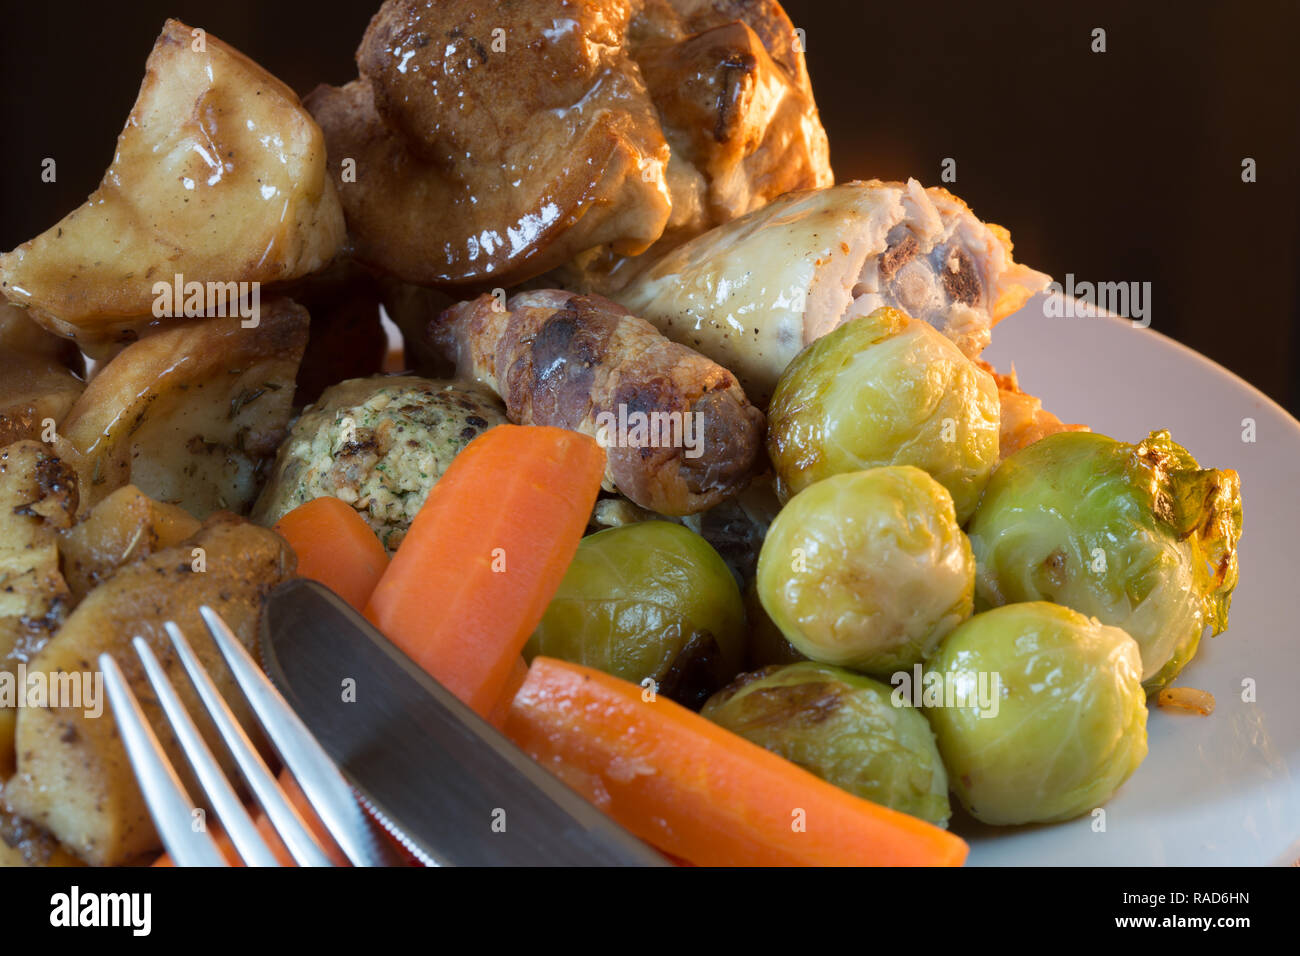 A popular British roast Chicken Sunday dinner with Yorkshire pudding, Stuffing, Pigs in blankets and potato and vegetables. Stock Photo